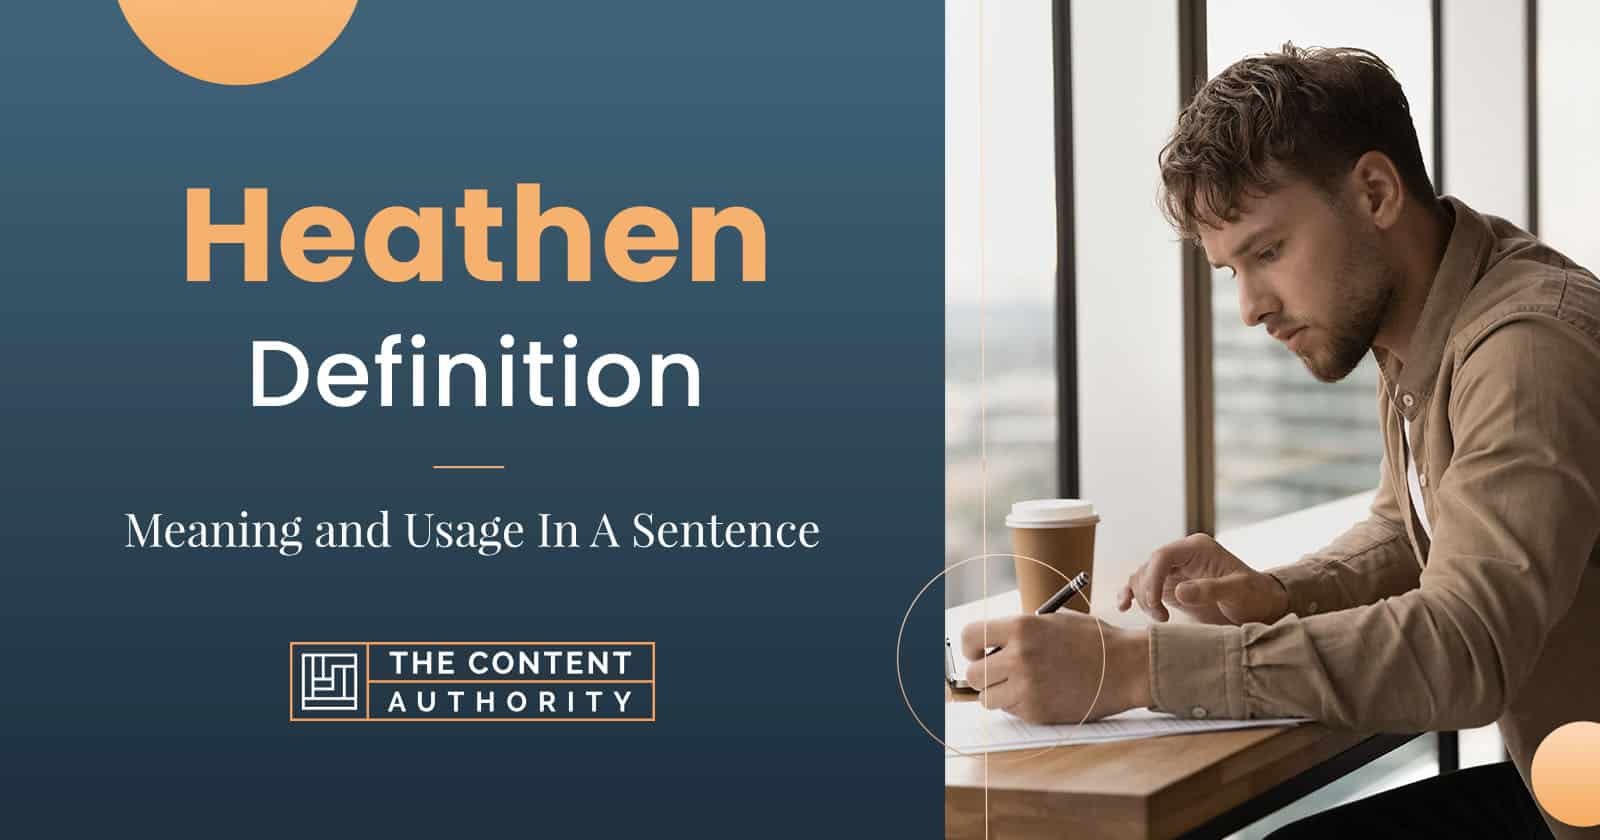 Heathen Definition – Meaning and Usage in a Sentence